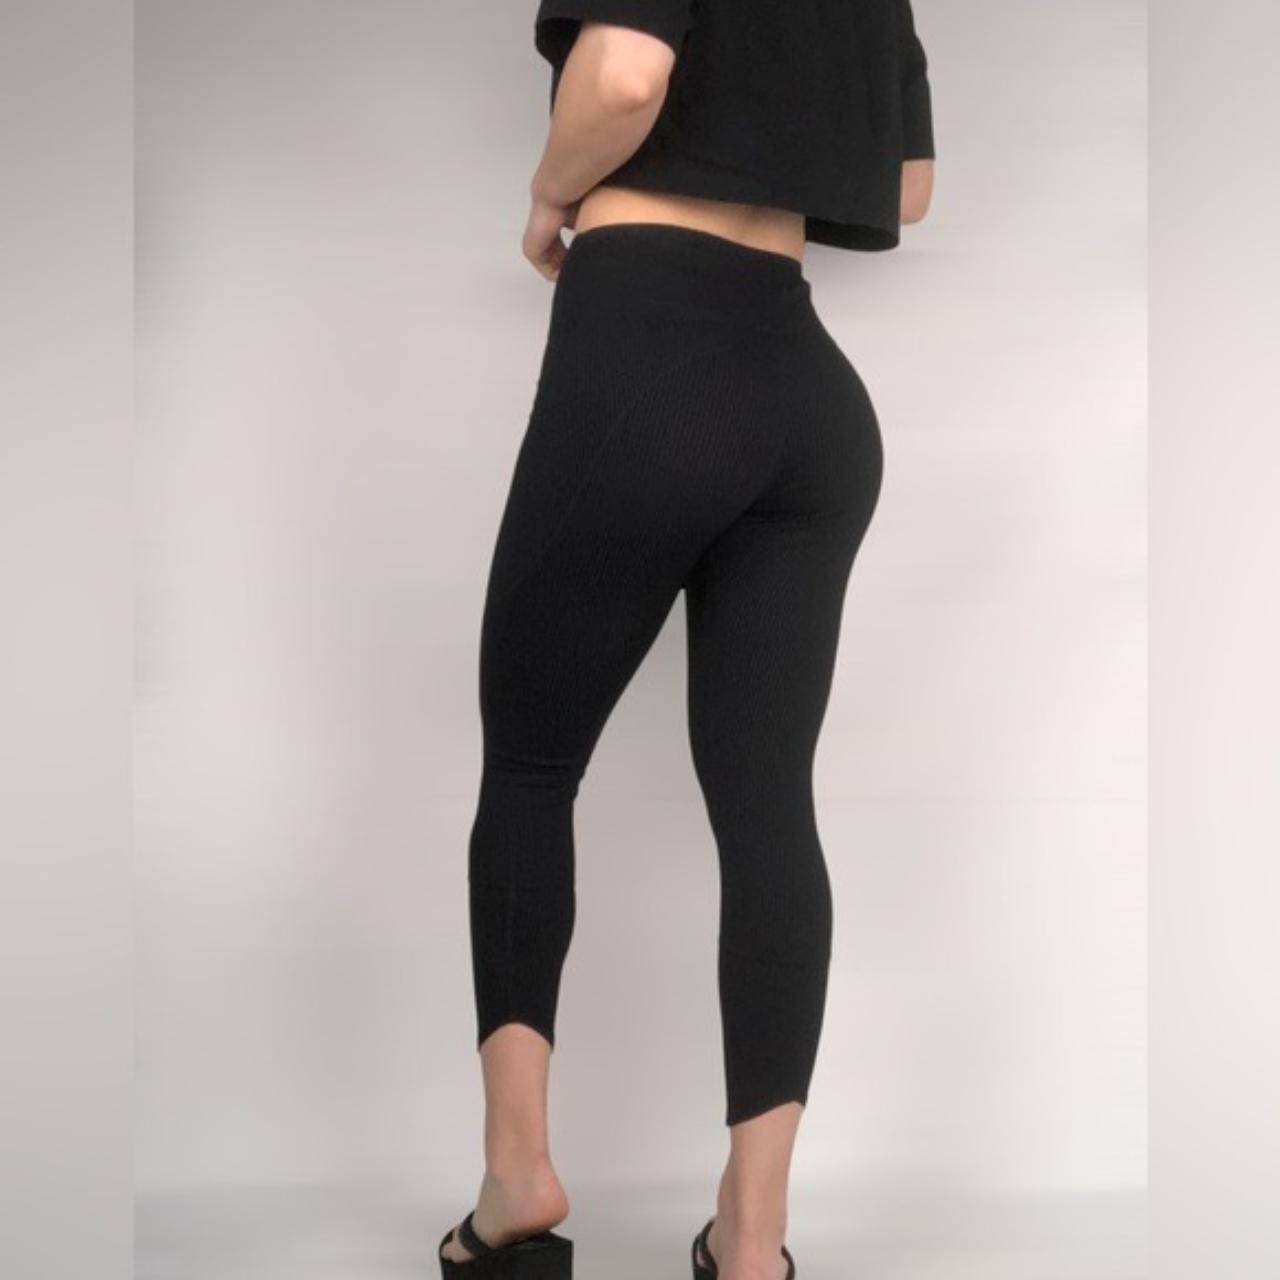 UH Fit Booty Lift Legging - Undercover Hippie